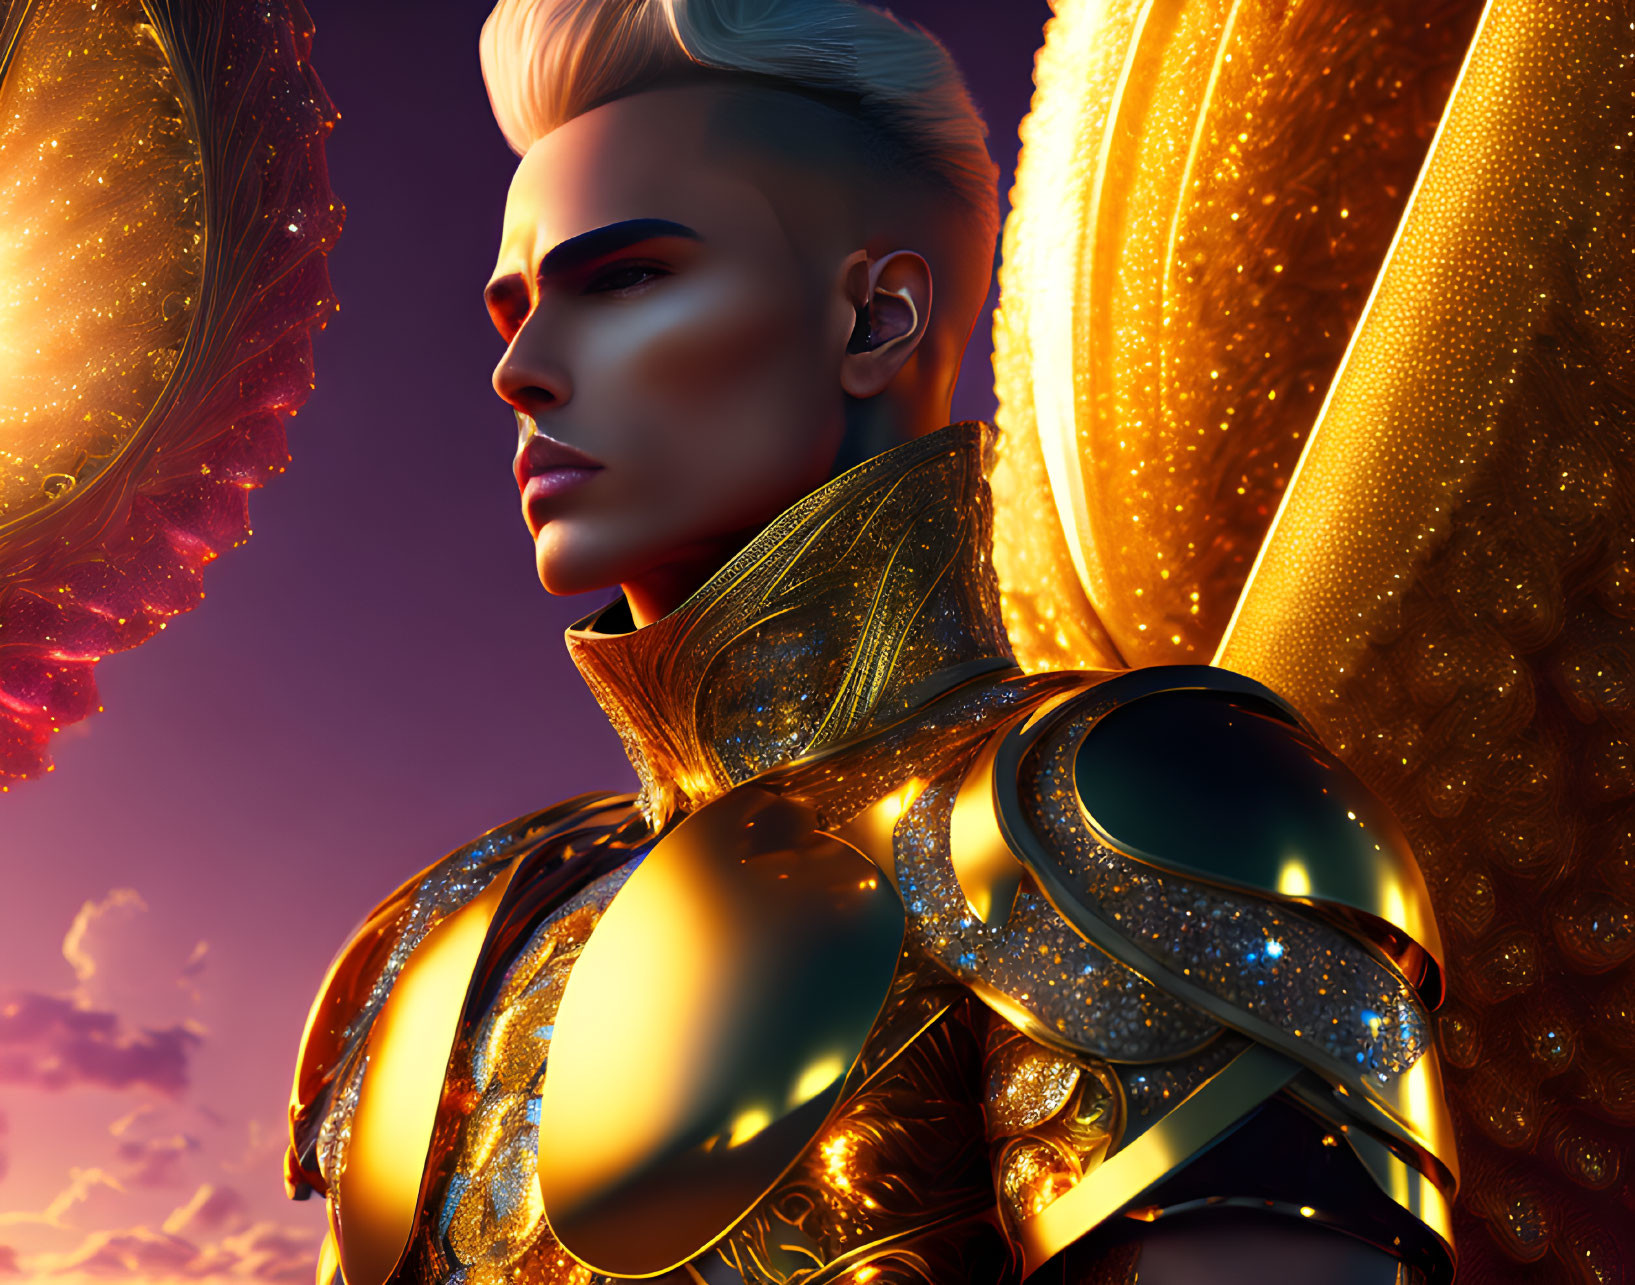 Futuristic warrior in golden armor with wings on vibrant sunset backdrop